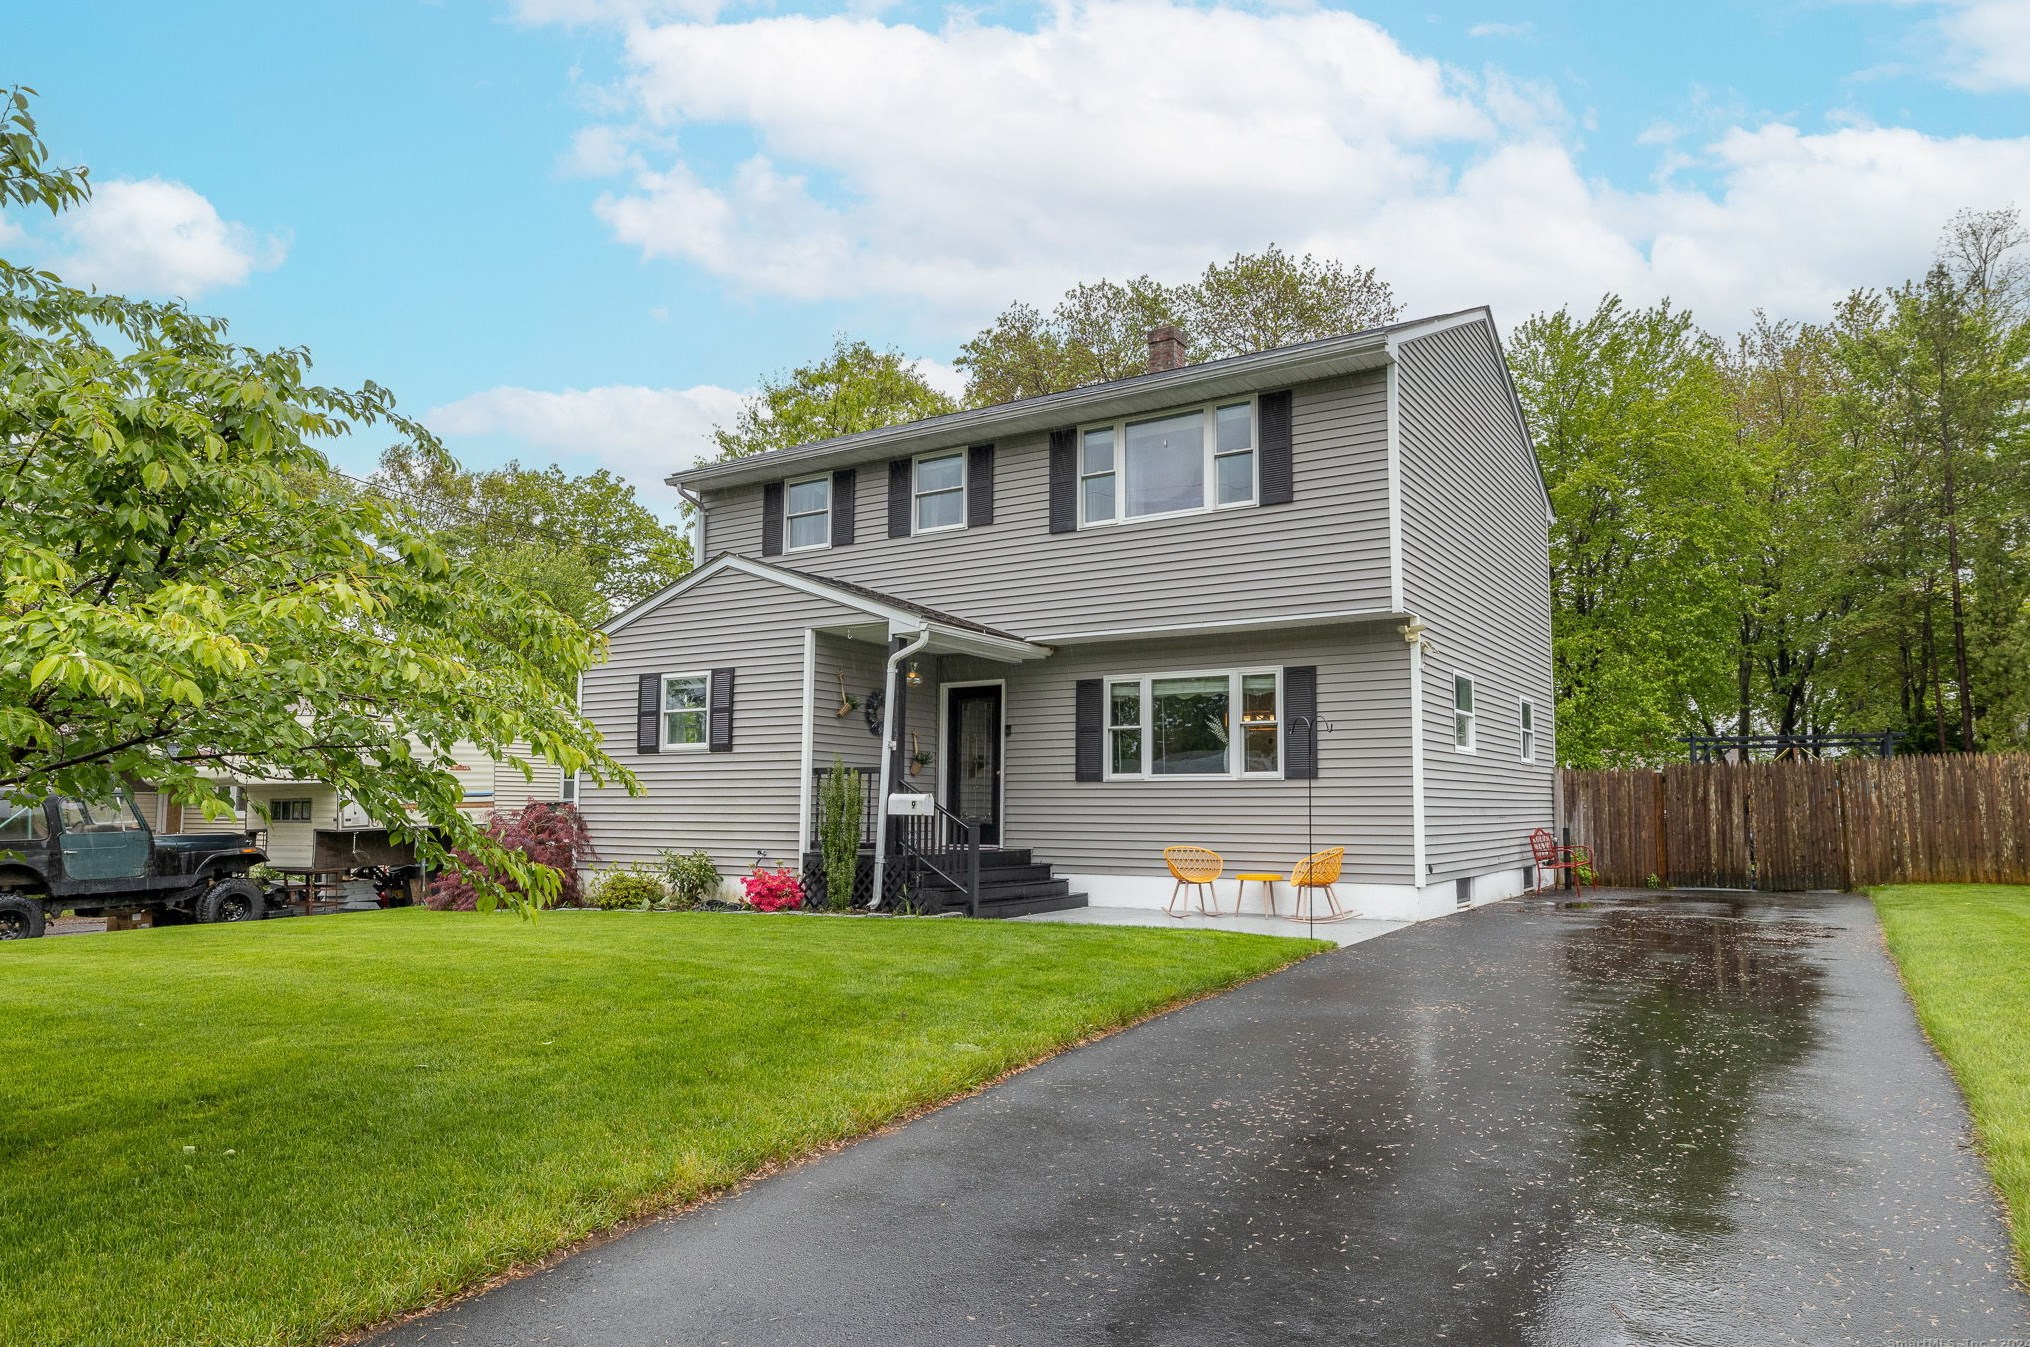 9 Laurie Dr, Enfield, CT 06082